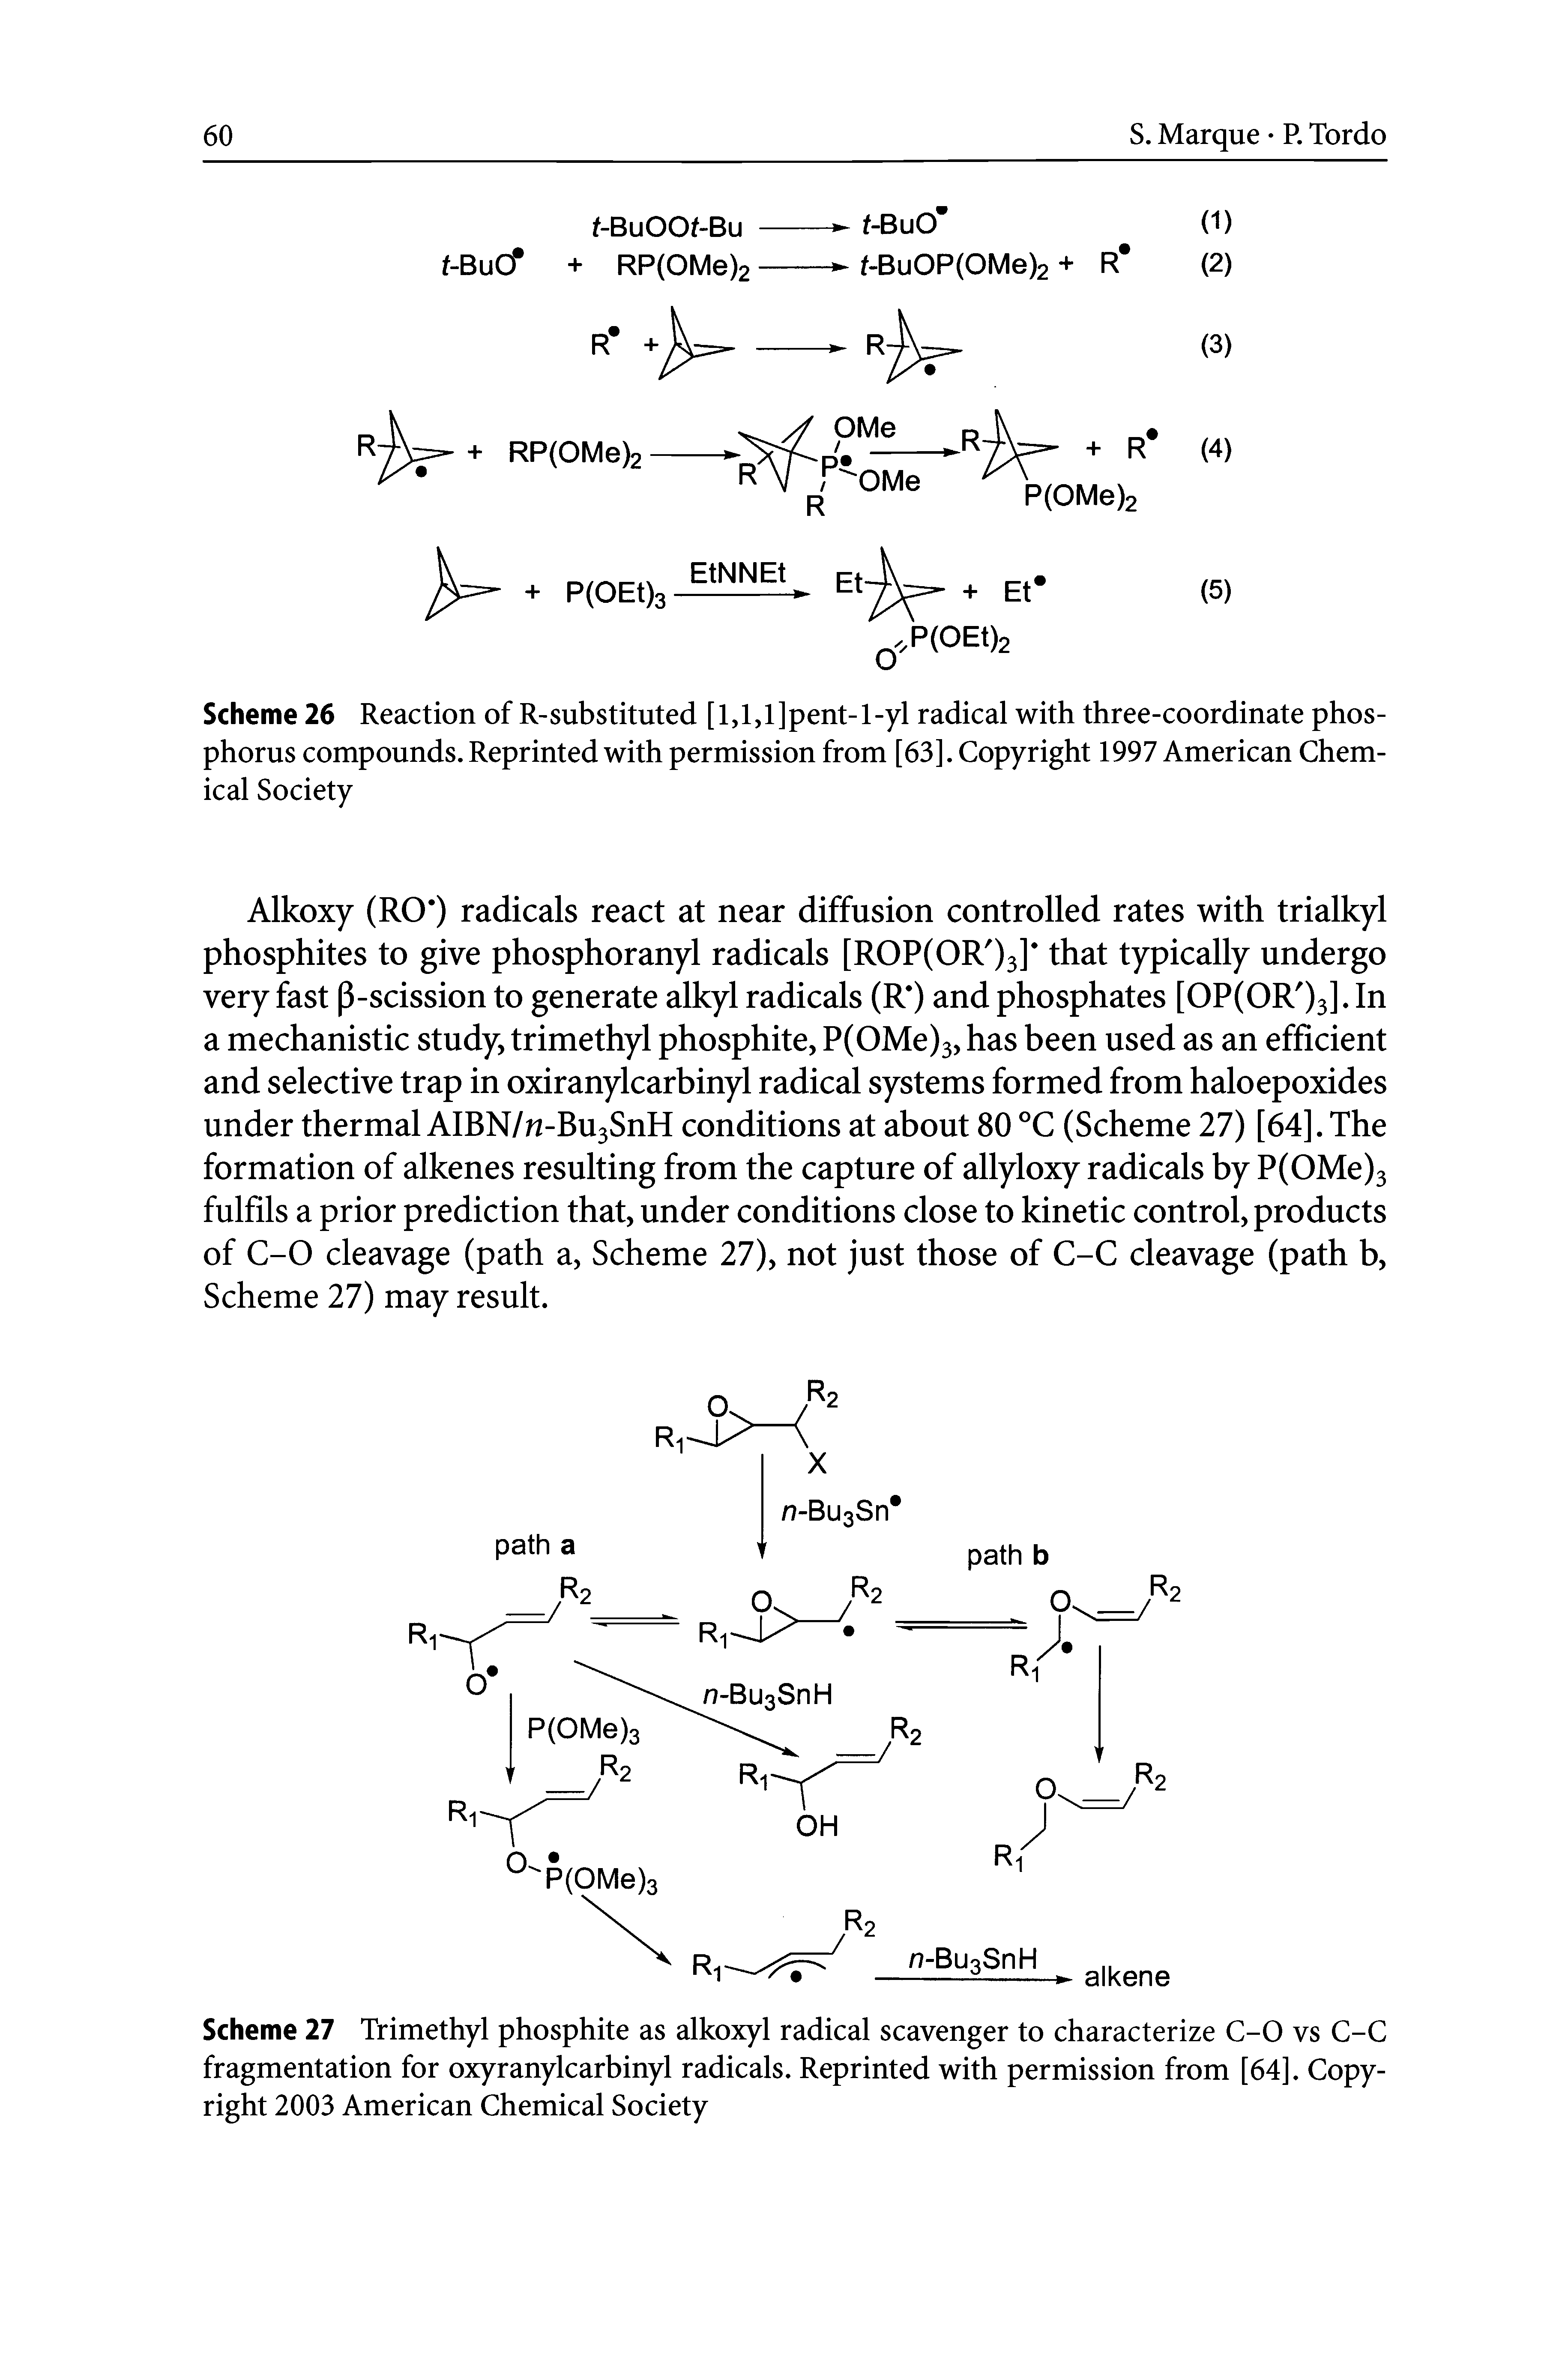 Scheme 27 Trimethyl phosphite as alkoxyl radical scavenger to characterize C-0 vs C-C fragmentation for oxyranylcarbinyl radicals. Reprinted with permission from [64]. Copyright 2003 American Chemical Society...